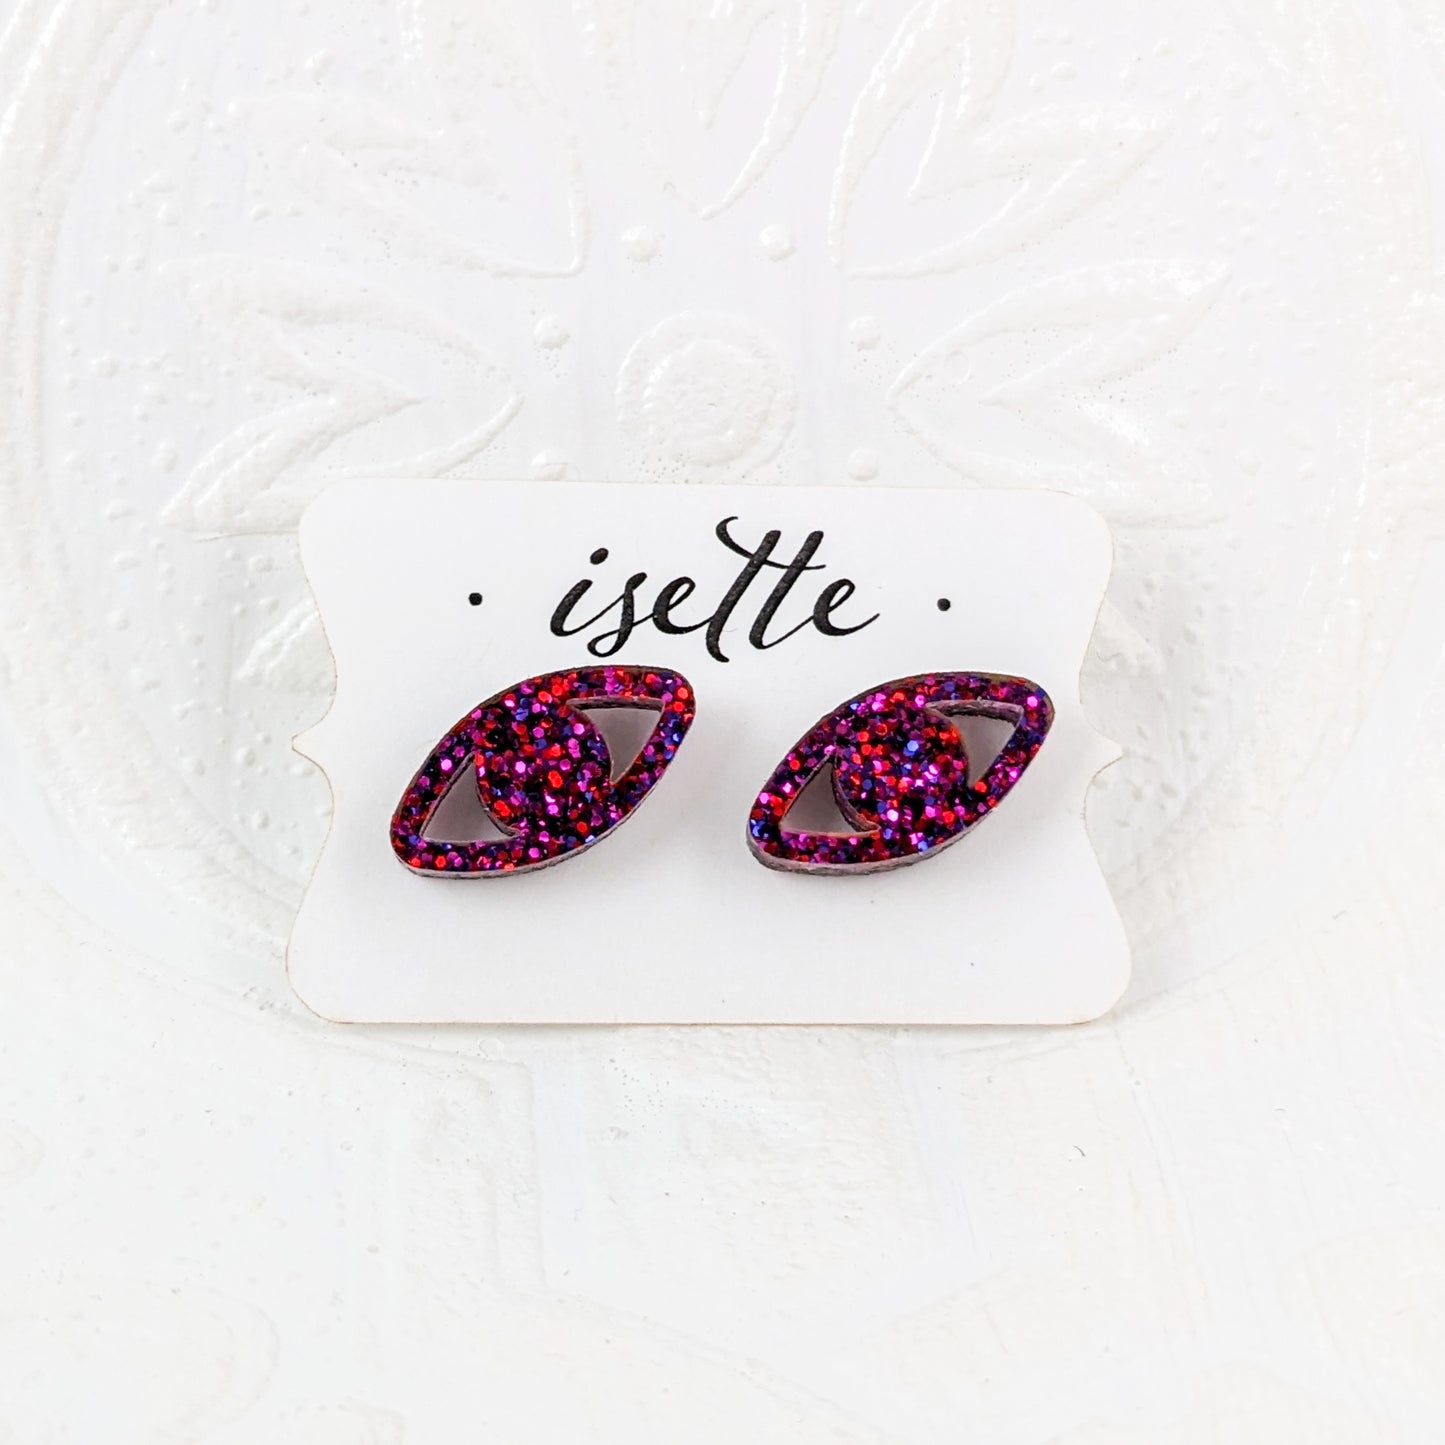 Peepers - Eye shaped stud earrings made with ruby sparkle acrylic and stainless steel posts on Isette card